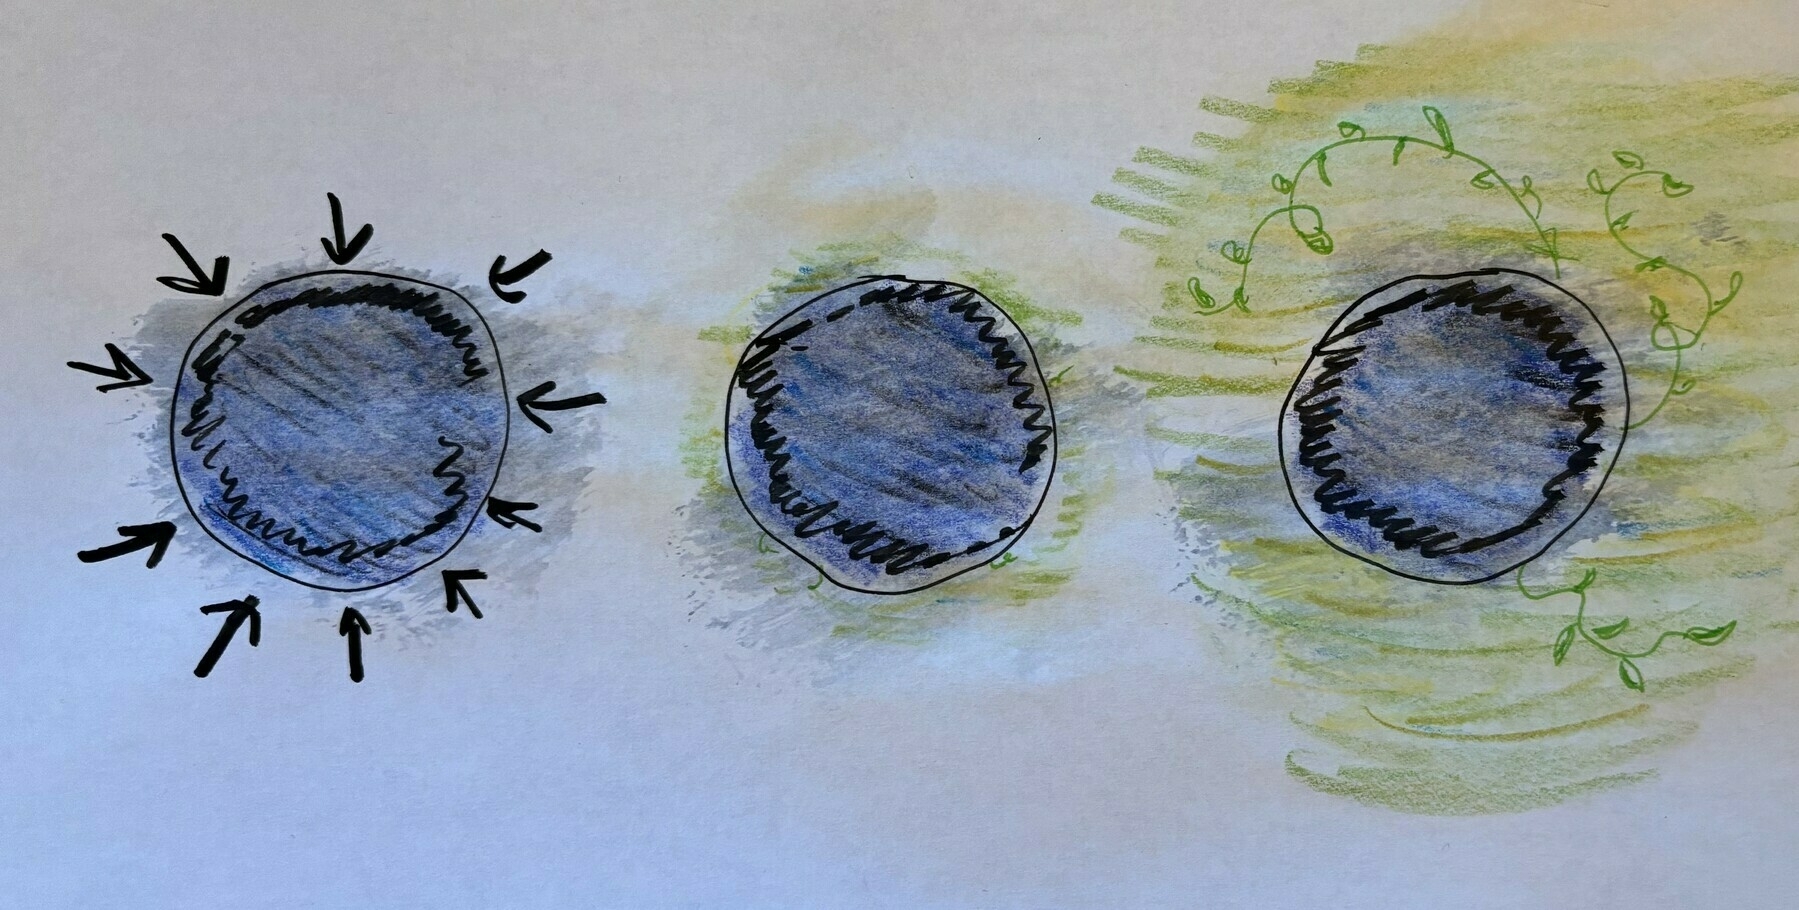 drawing of three black circles, the same size, first circle has arrows aiming it, second circle, has a little bit of green around it, third circle is surrounded by a field of green with vines beginning to grow from it